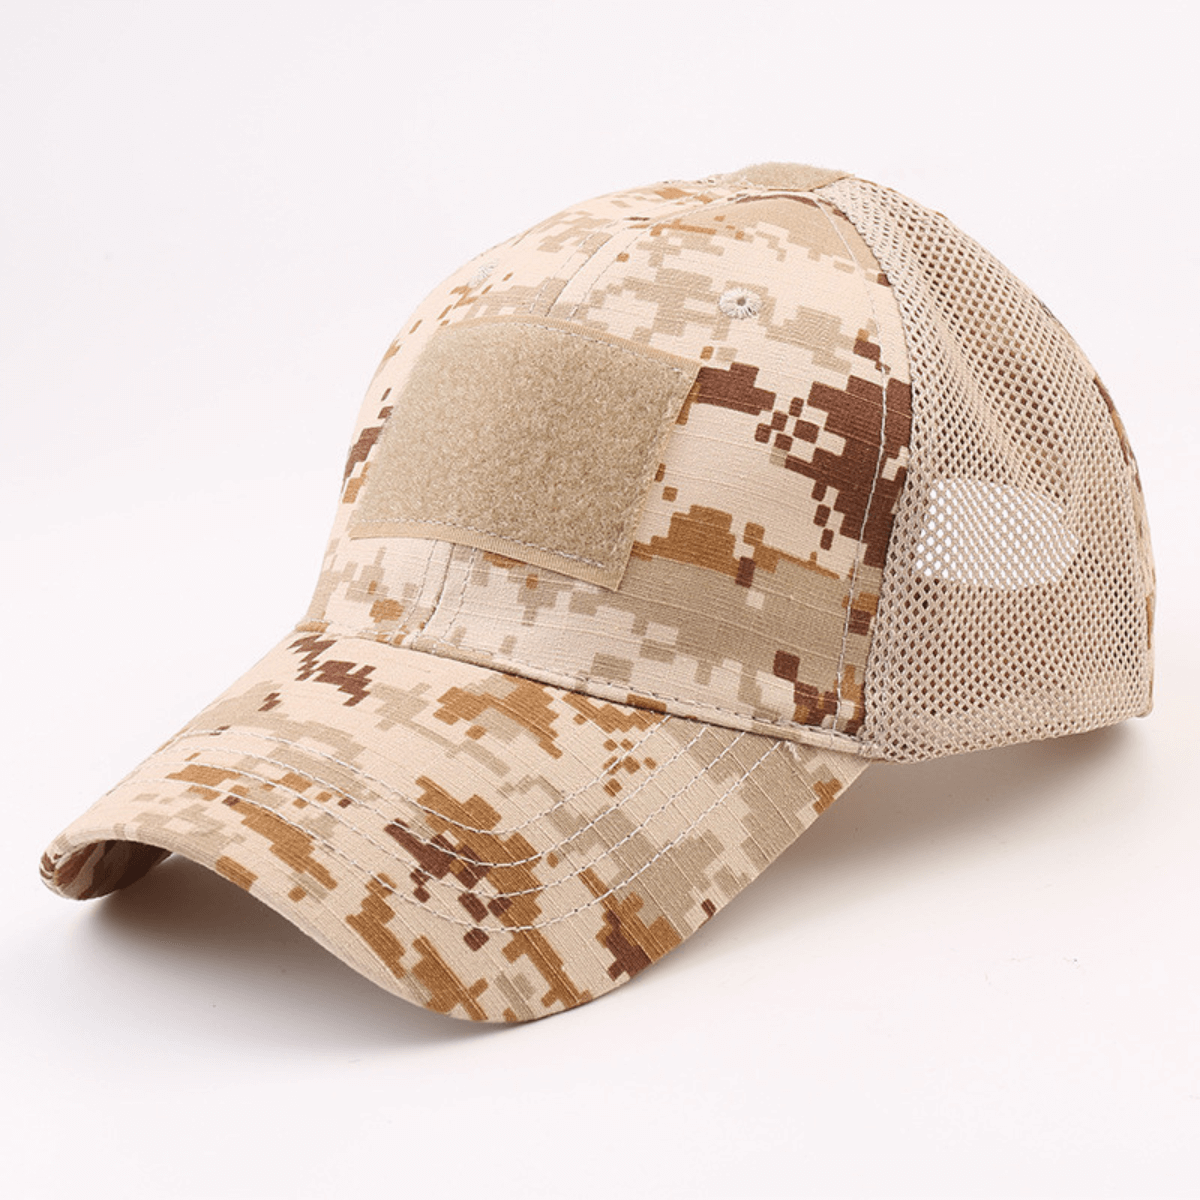 Military-Style Tactical Patch Hat with Urbanheer Adjustable Strap –